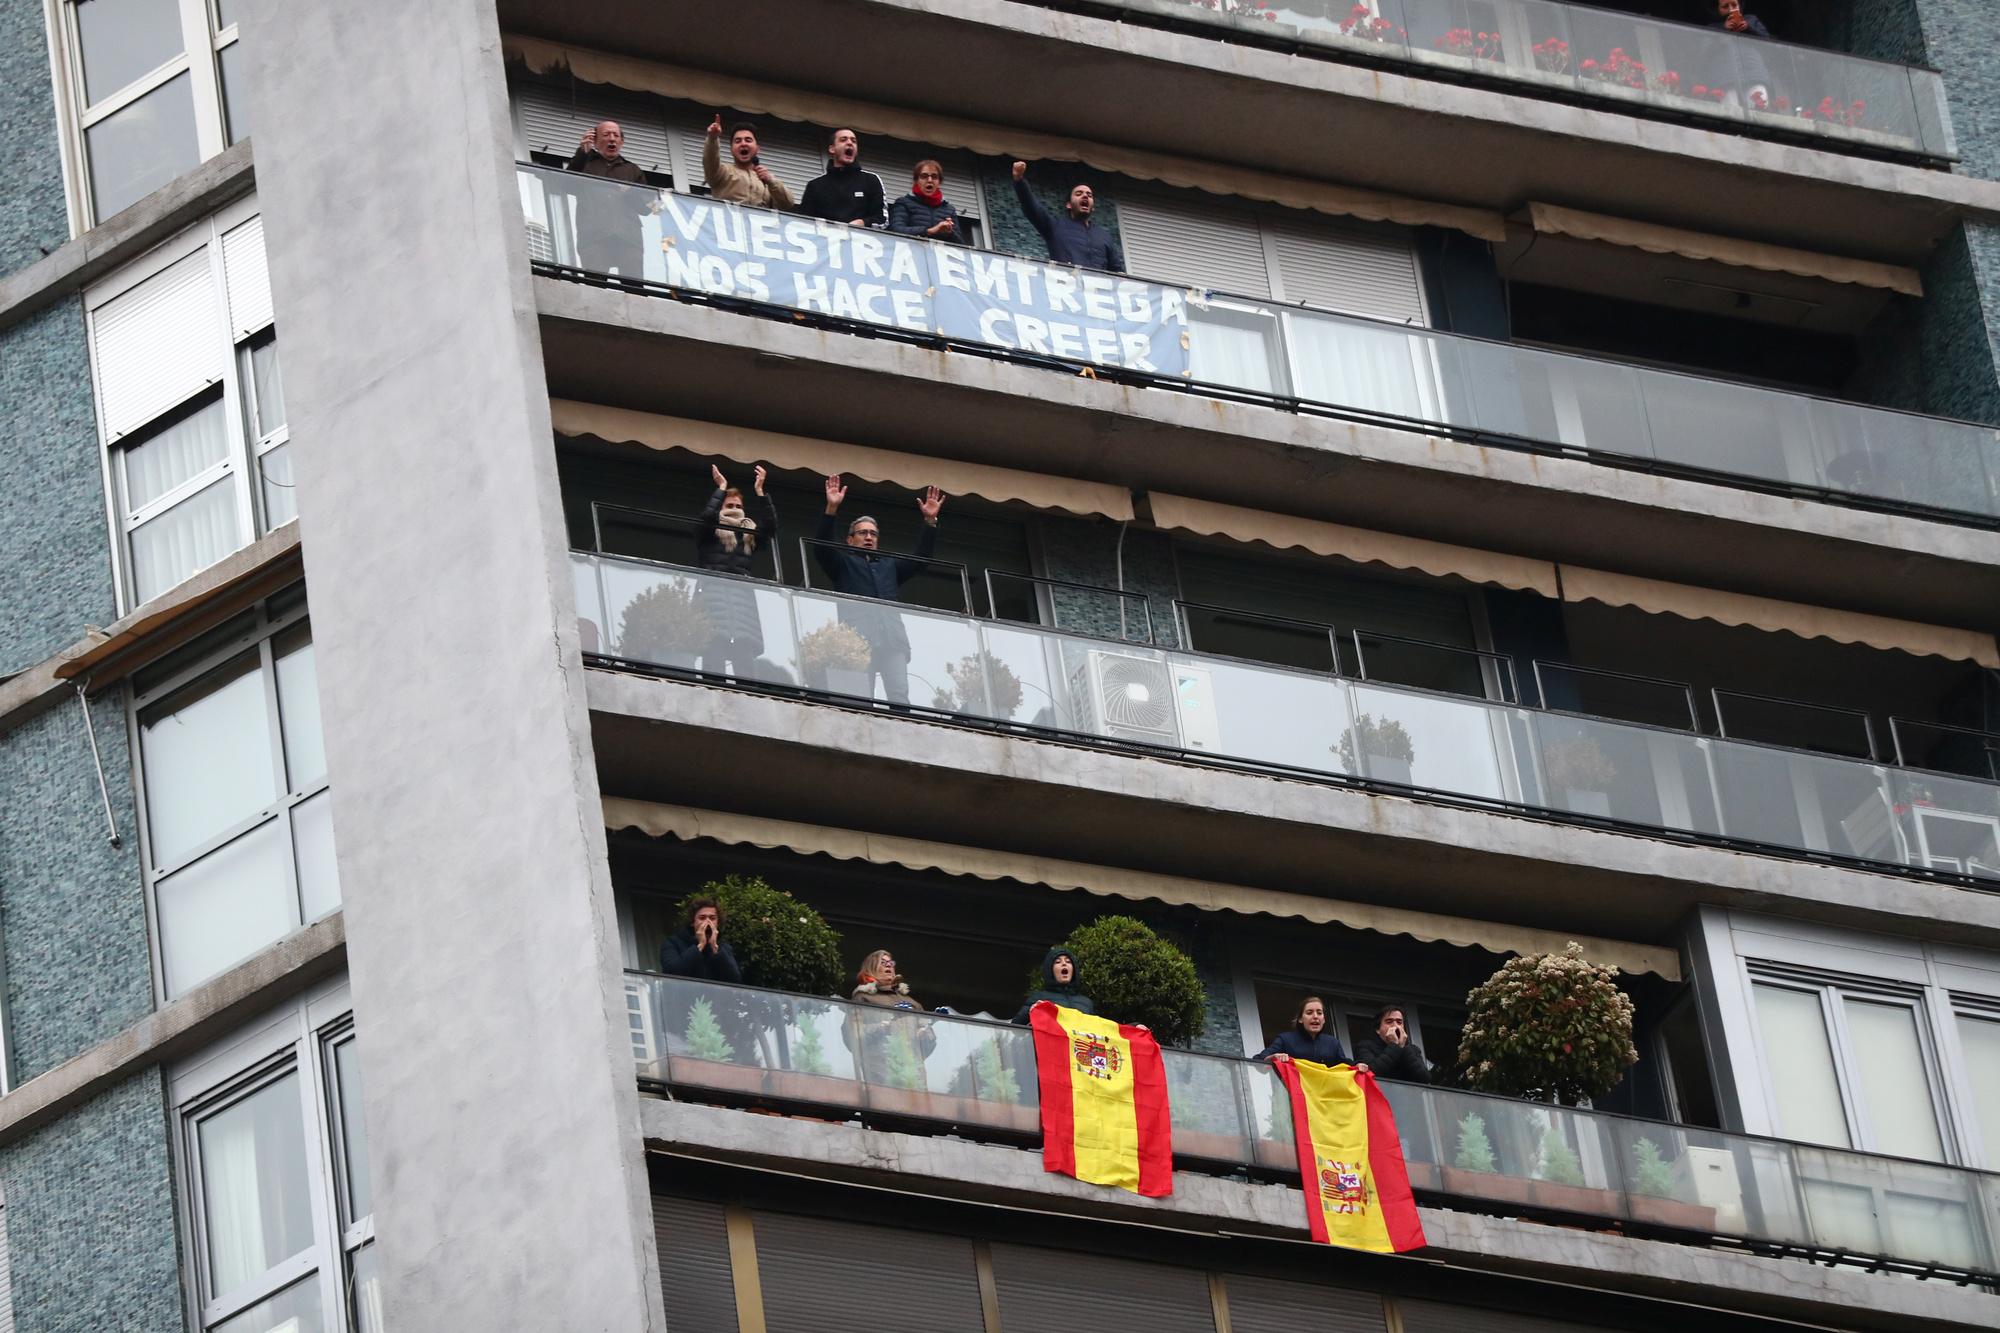 People confined in their homes applaud from their balconies in support of healthcare workers, outside Fundacion Jimenez Diaz hospital, amid the coronavirus disease (COVID-19) outbreak, in Madrid, Spain, March 30, 2020. Banner reads "Your dedication makes us believe". REUTERS/Sergio Perez